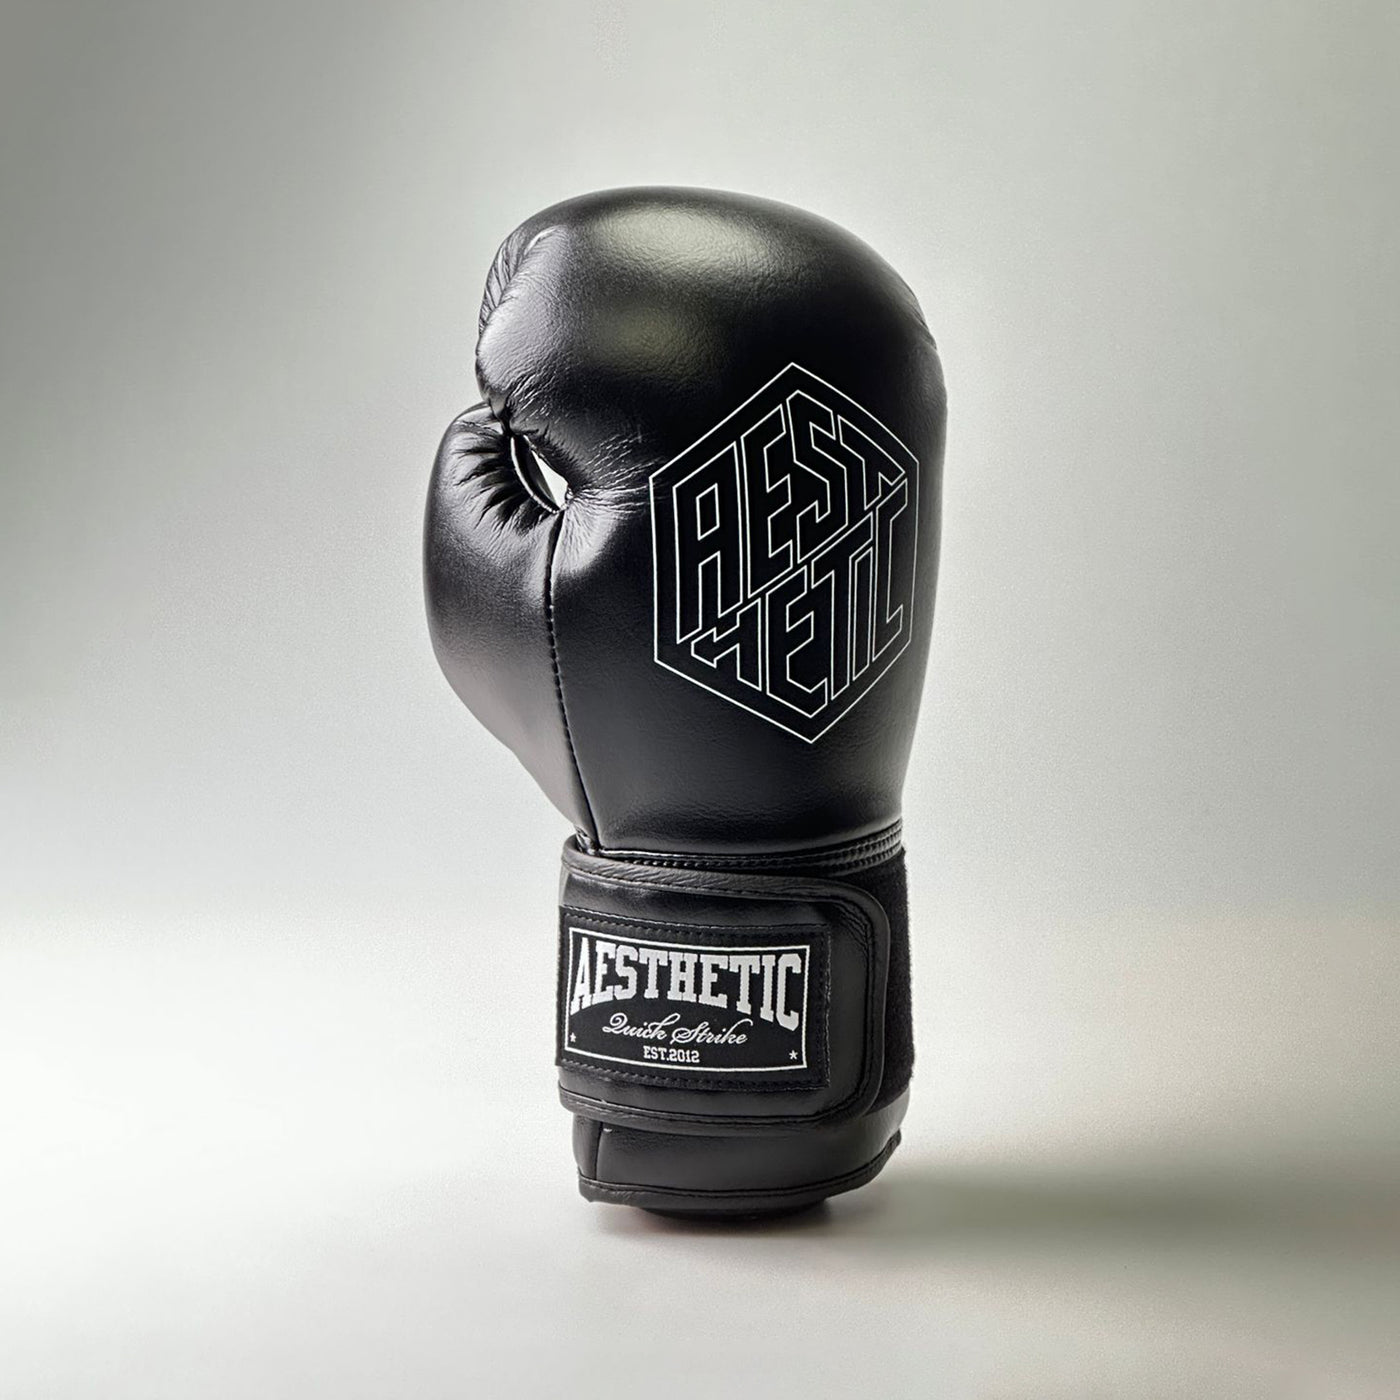 Quick Strike Boxing Gloves